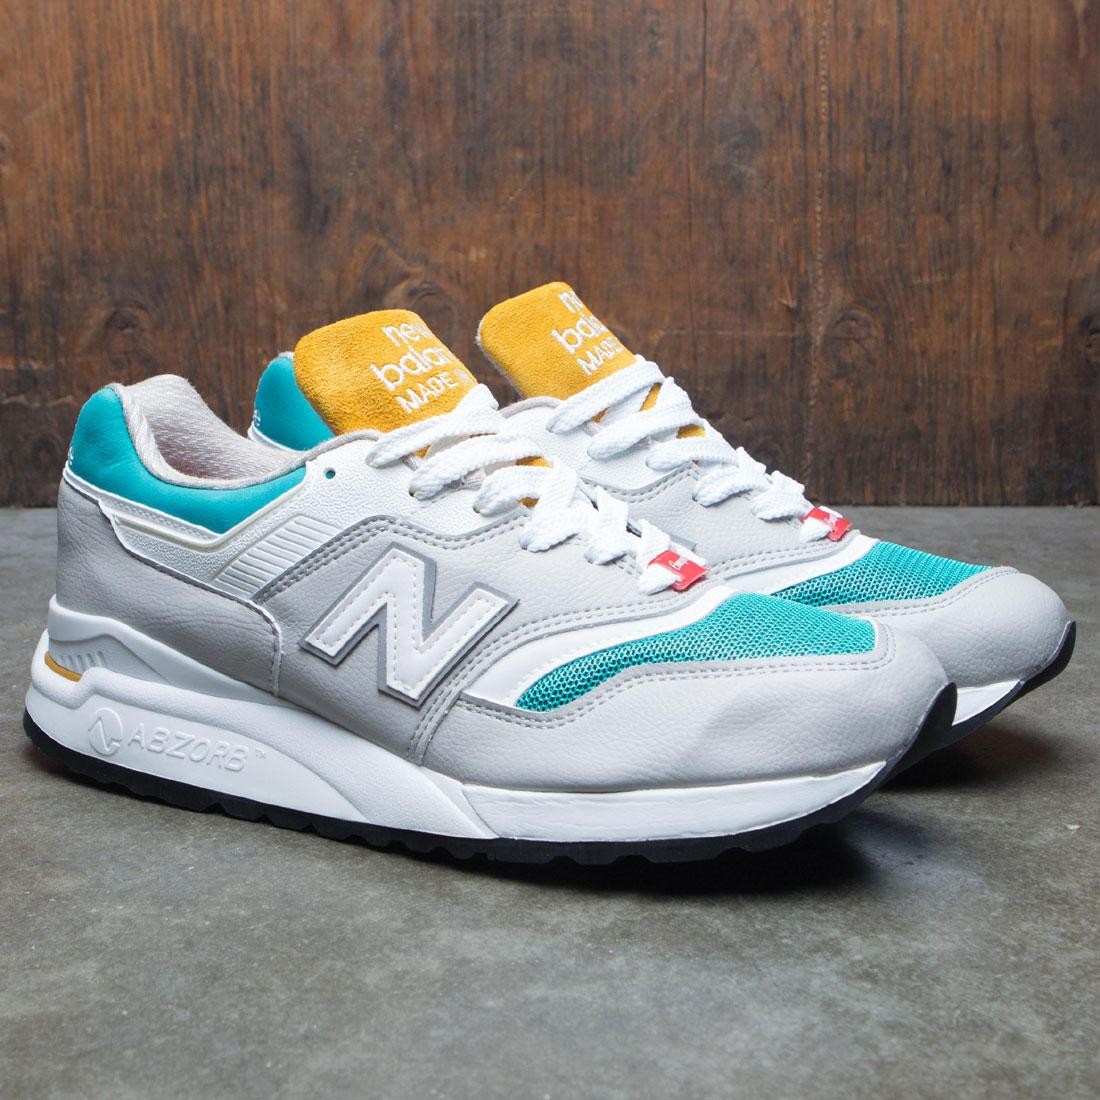 New Balance x Concepts Men 997.5 Esplanade M9975CN - Made In USA (gray /  teal / white)